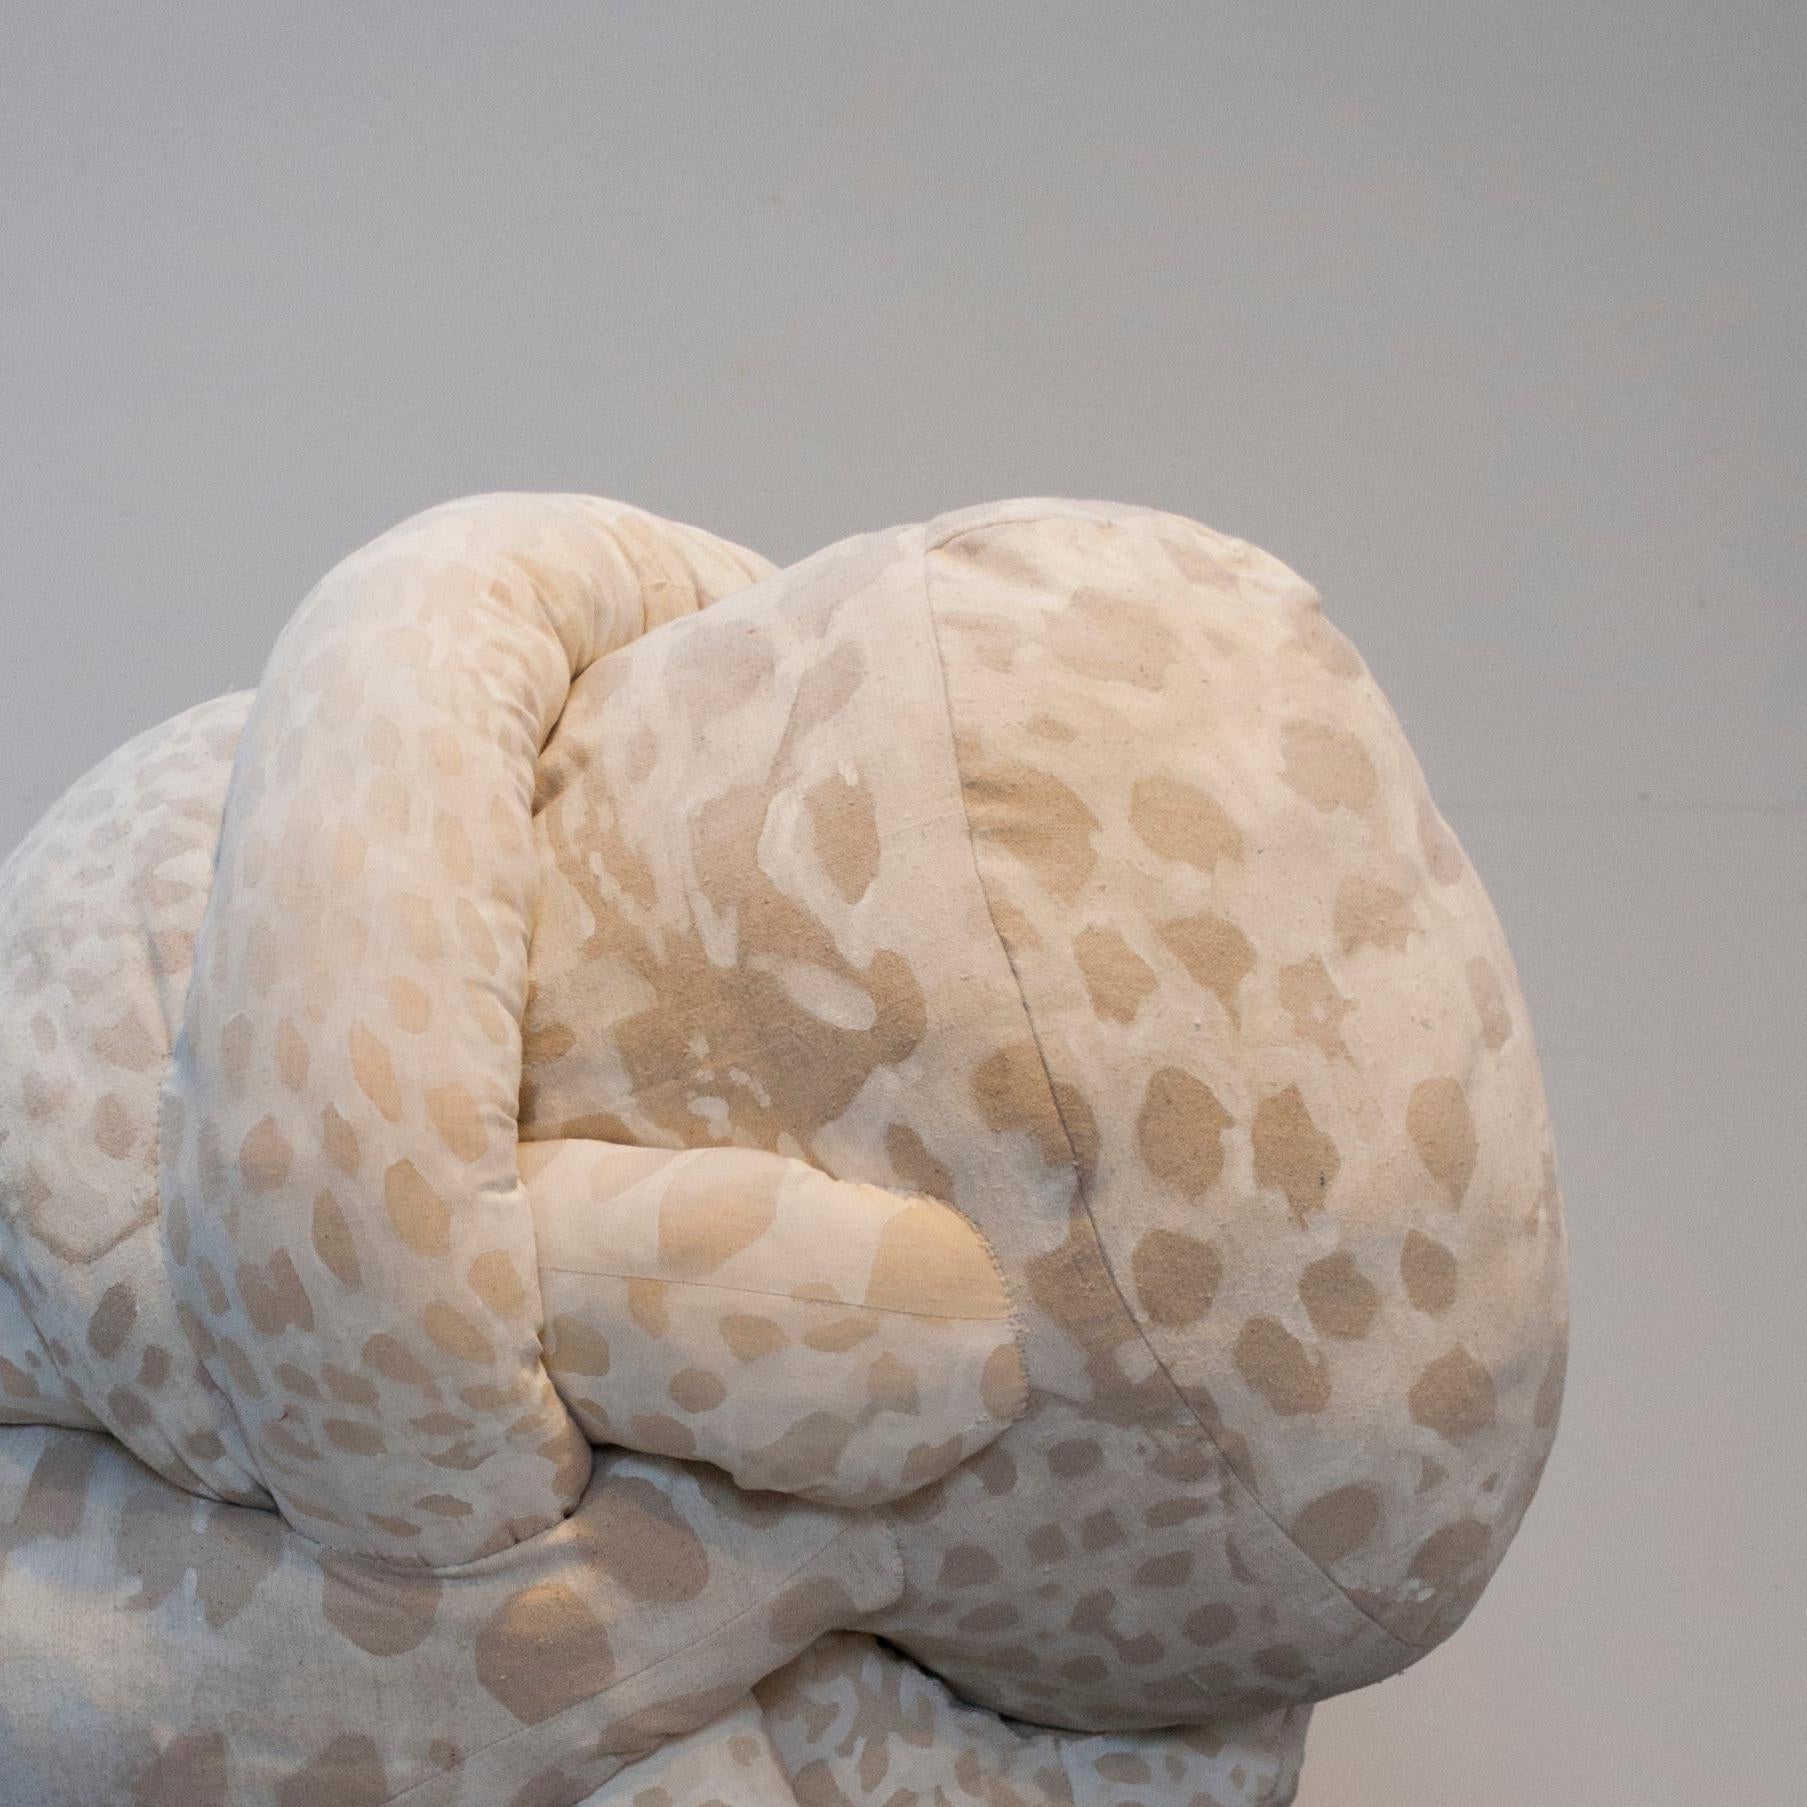 Hold - Contemporary Sculpture by Anna Hepler